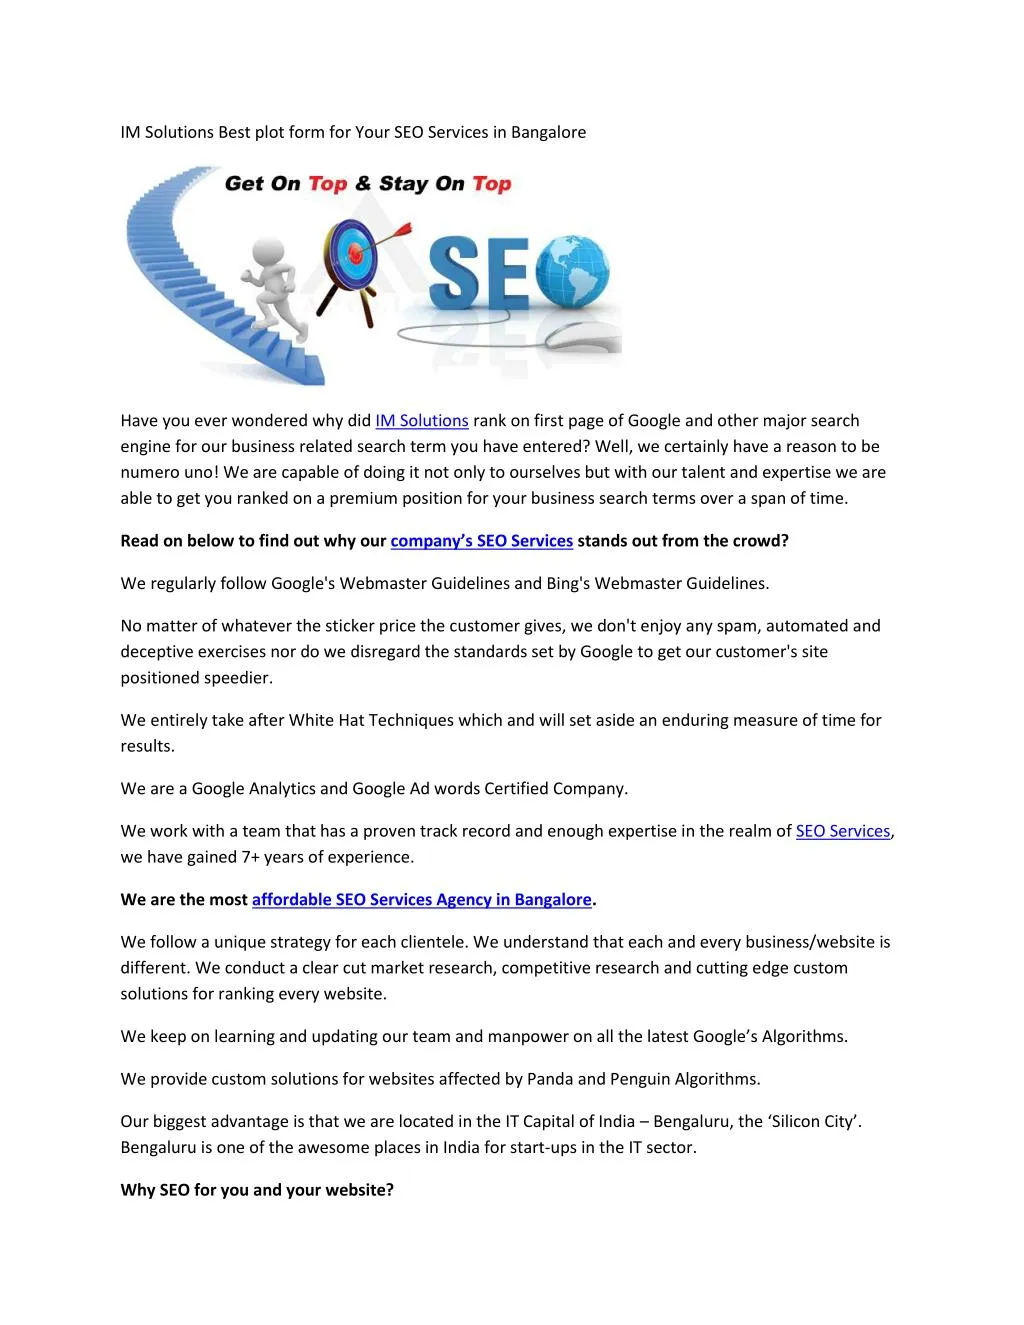 im solutions best plot form for your seo services